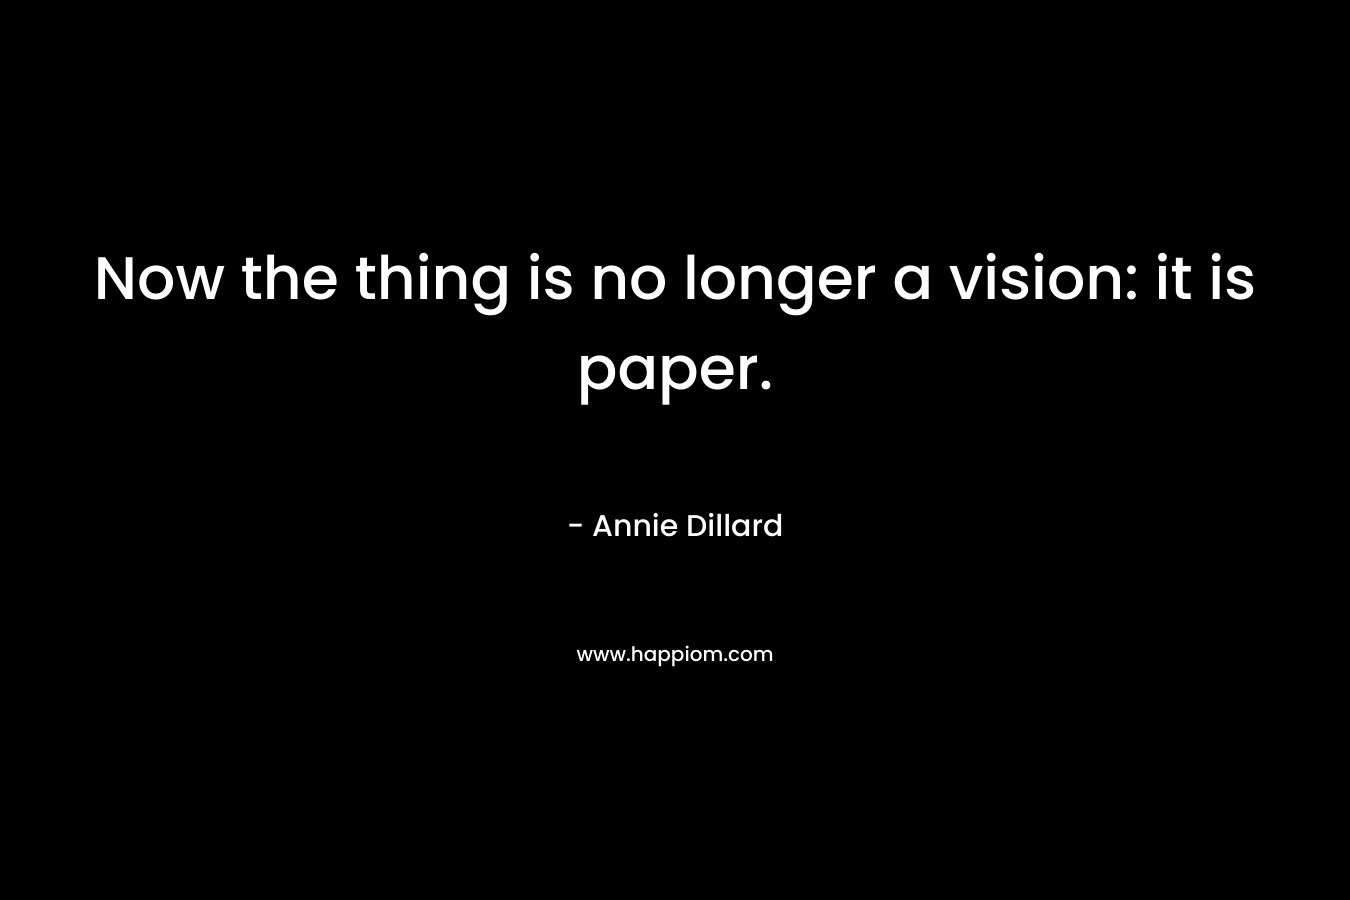 Now the thing is no longer a vision: it is paper. – Annie Dillard